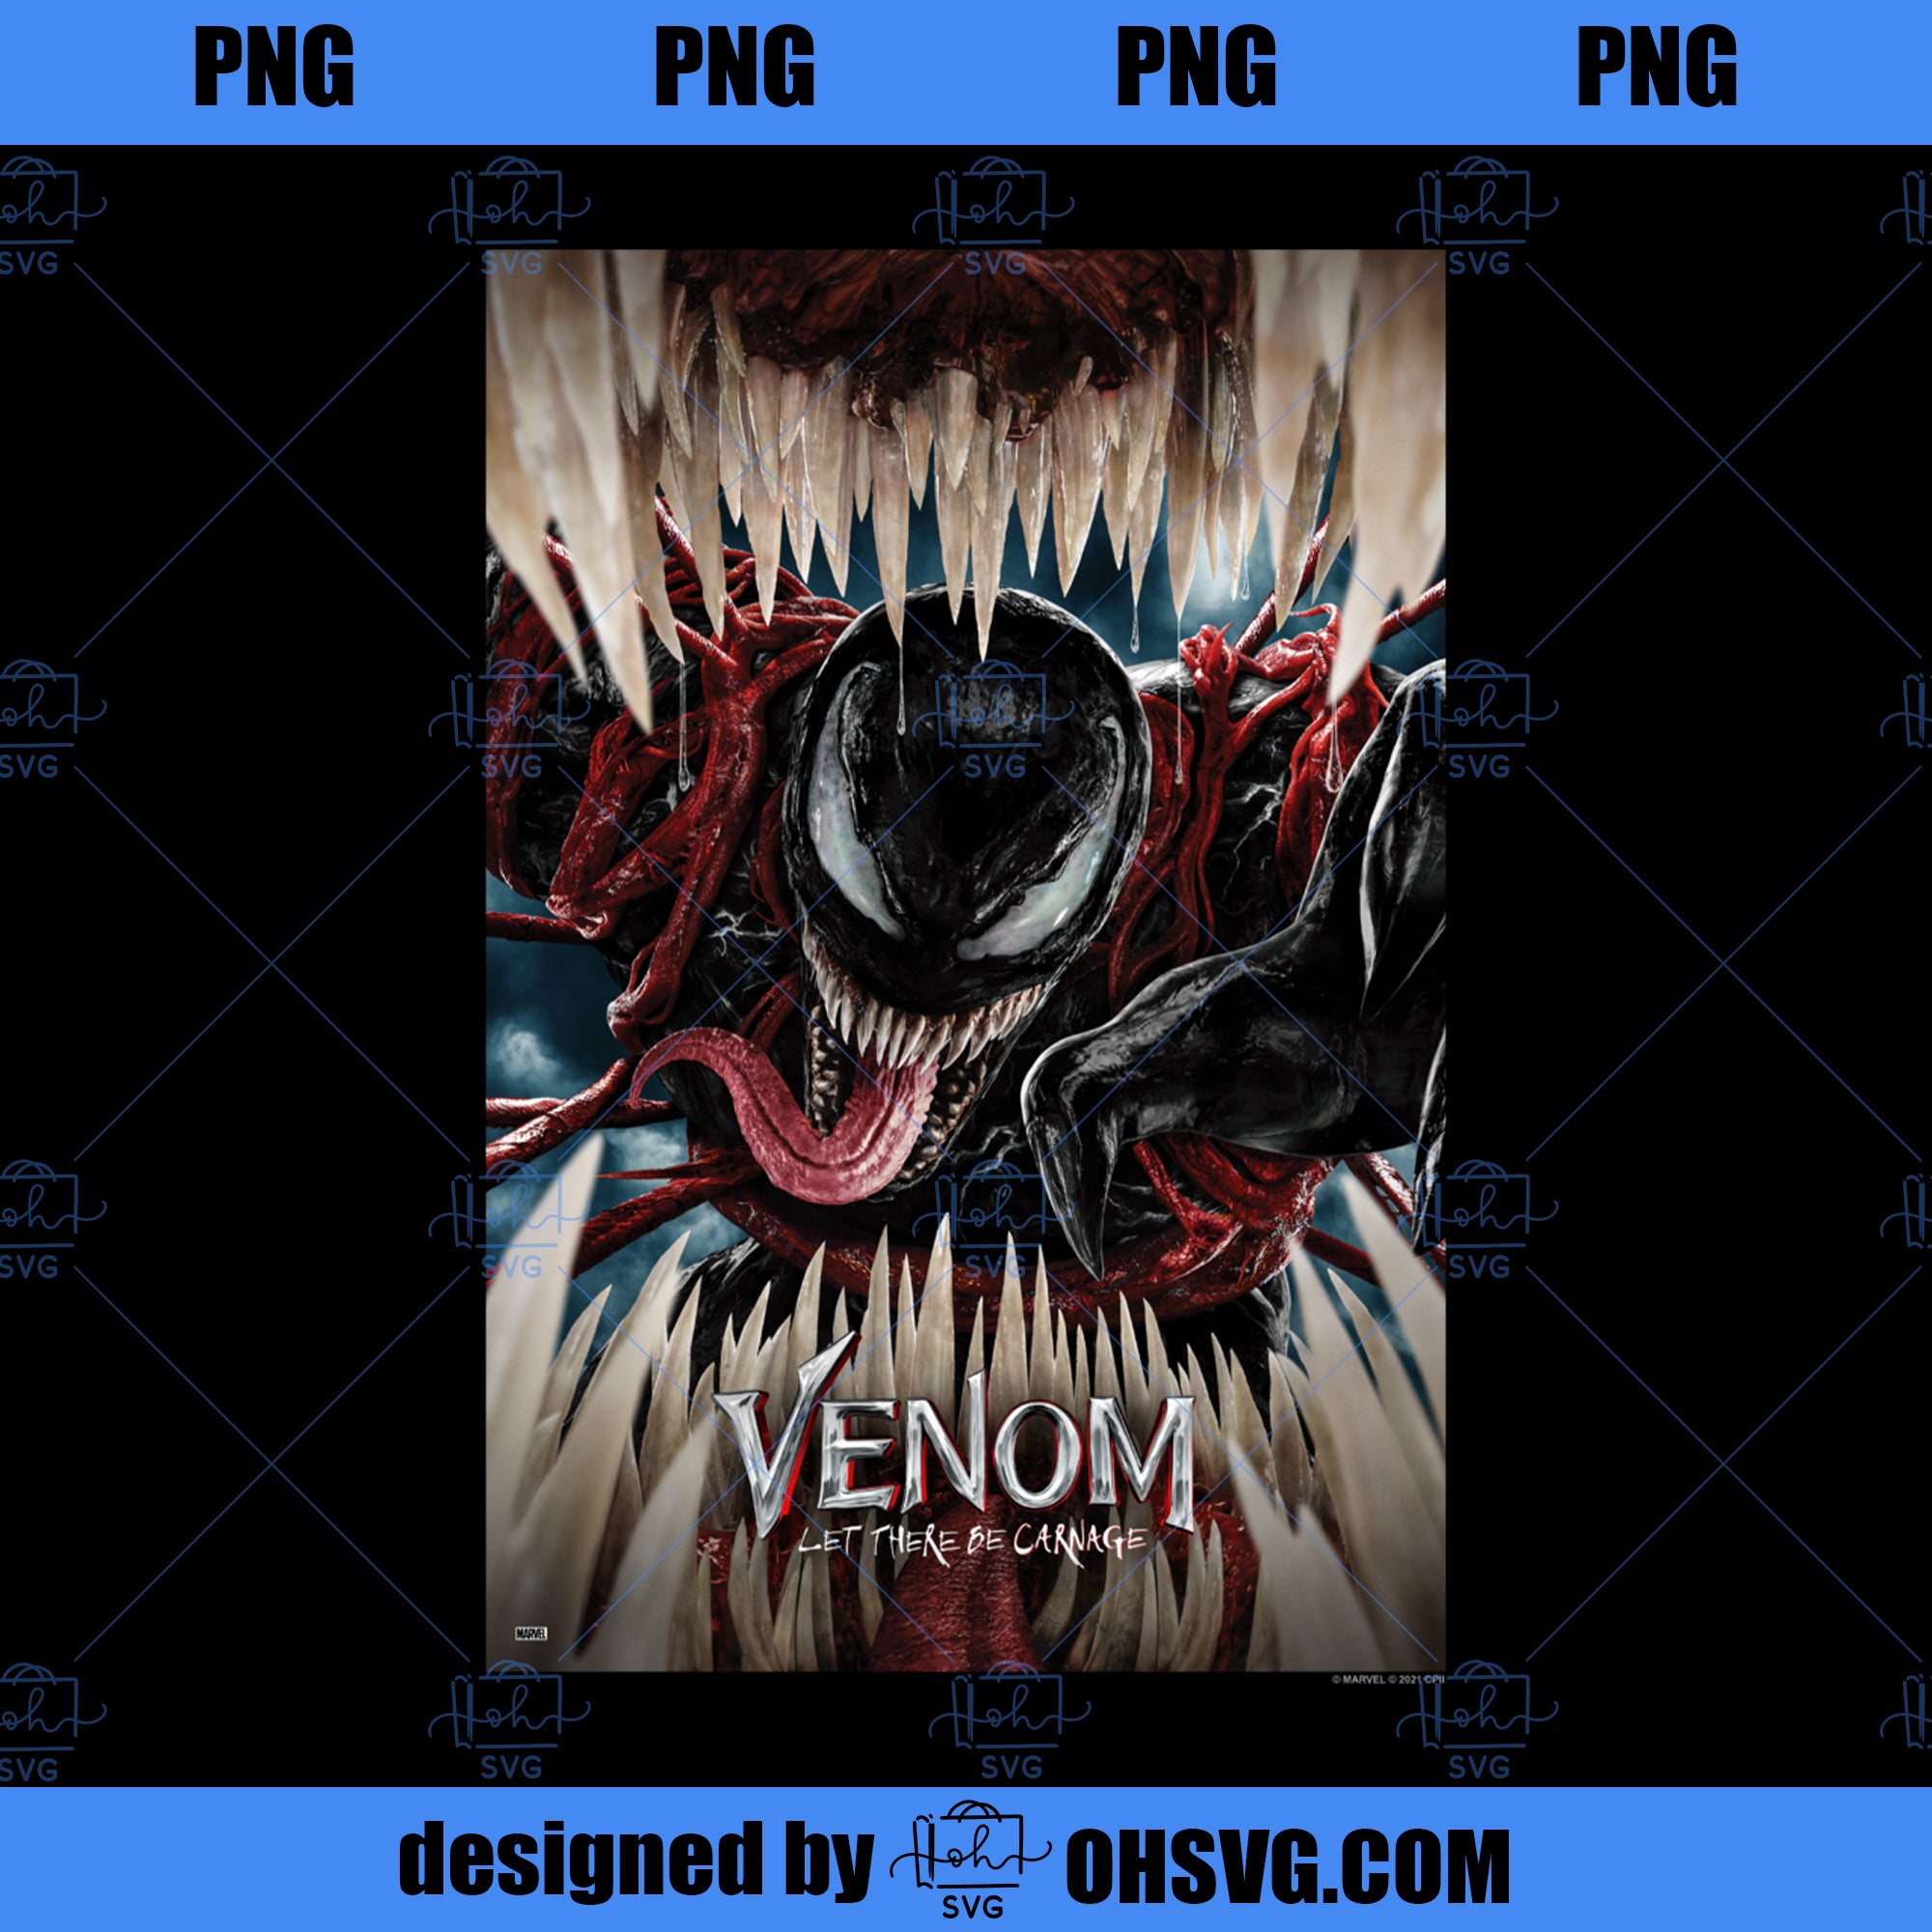 Marvel Venom 2 Let There Be Carnage Movie Poster  PNG, Movies PNG, Marvel Venom PNG